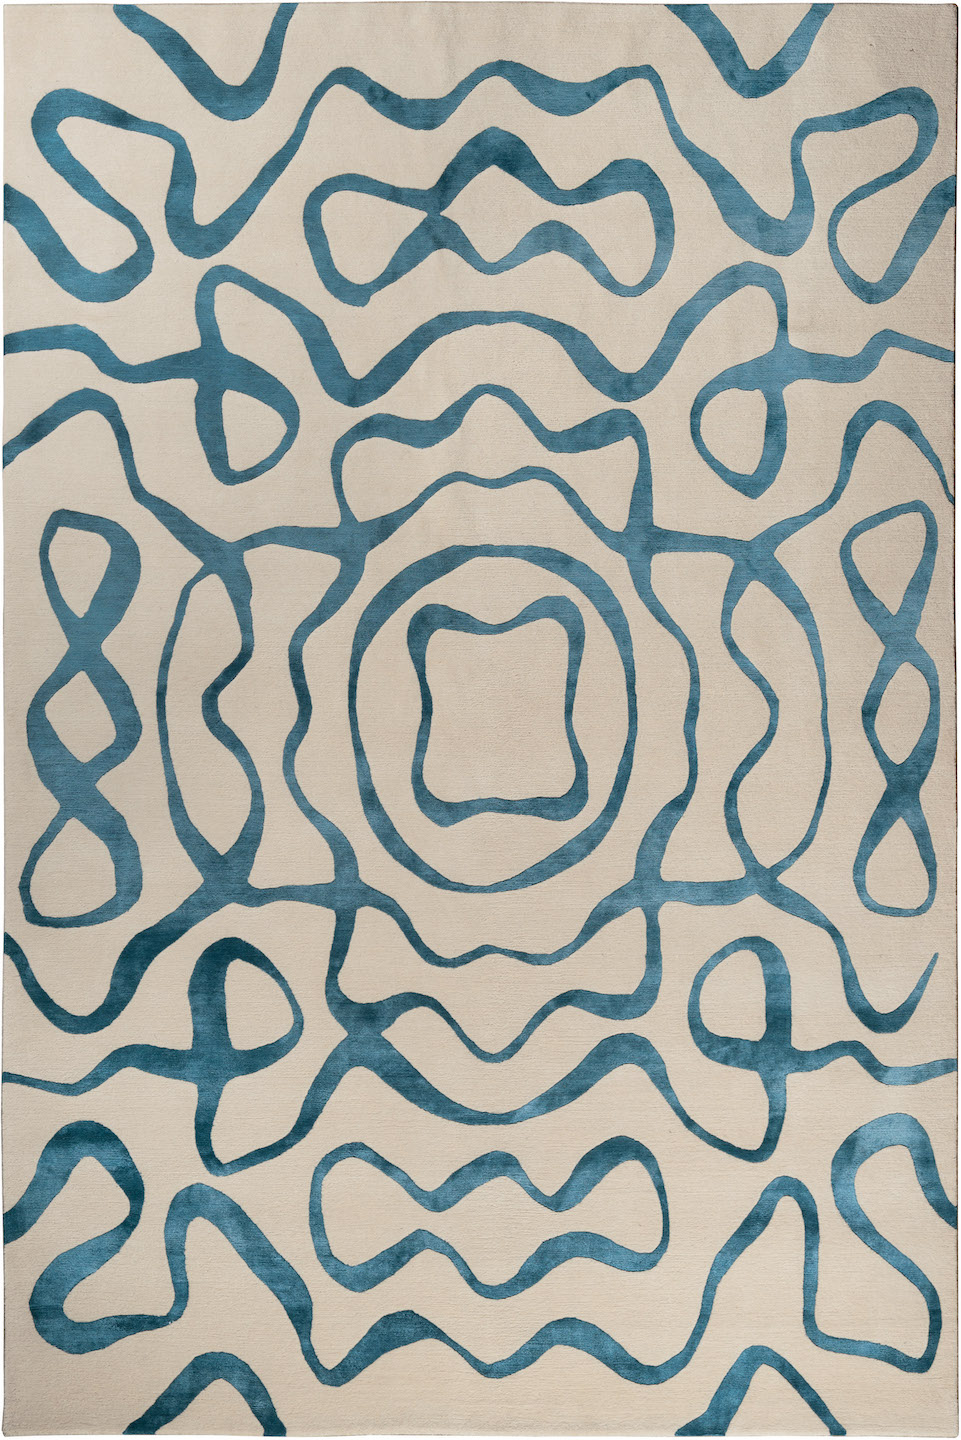 New-York-Design-Center-WNWN-The-Rug-Company-Sonic-Wave-Gallery